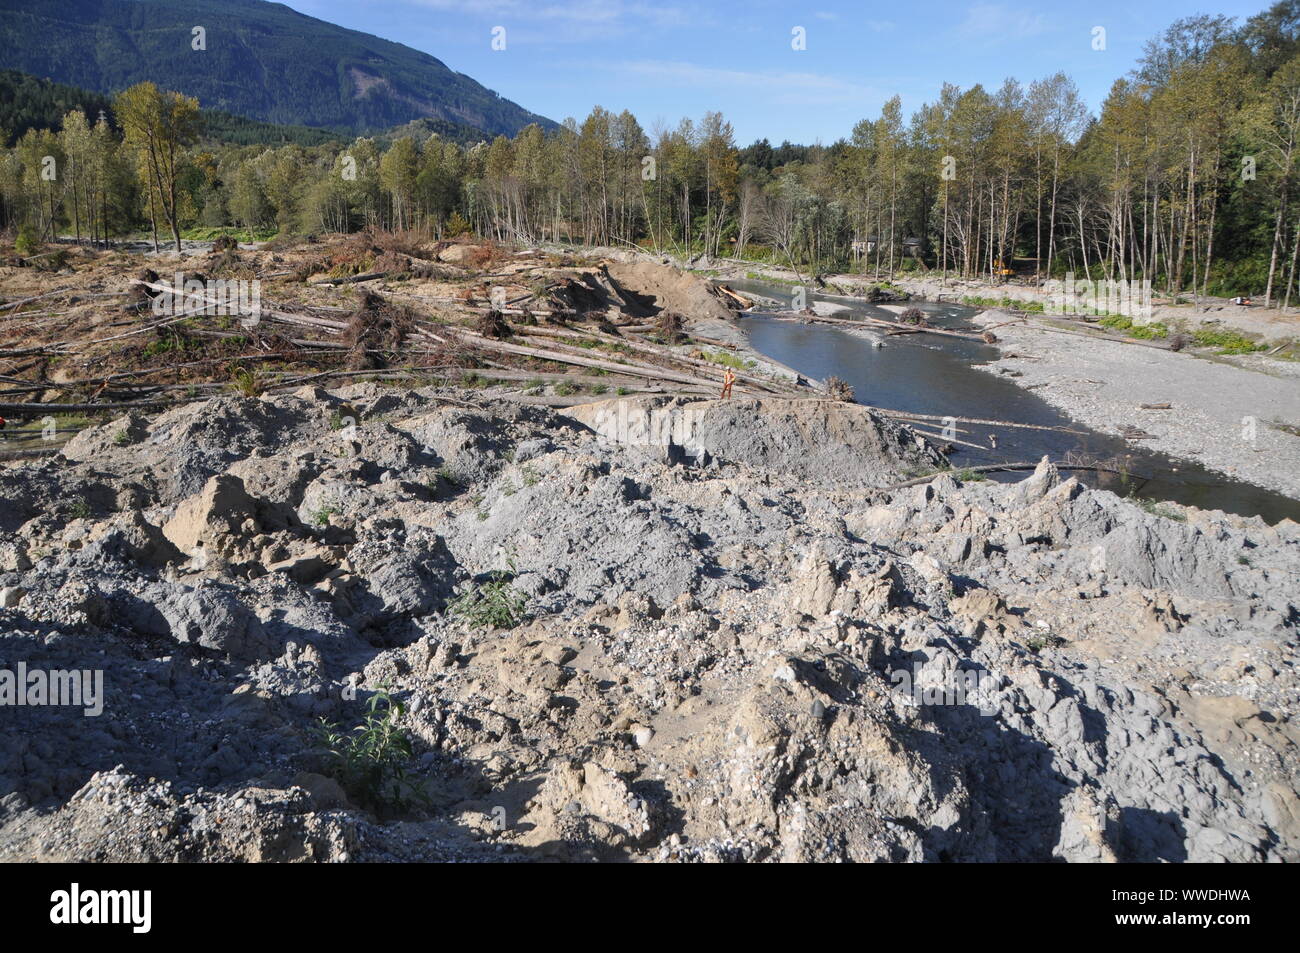 Right lateral margin of the deadly 2014 Oso Landslide, North Fork Stillaguamish River Valley, Snohomish County, Washington, USA Stock Photo